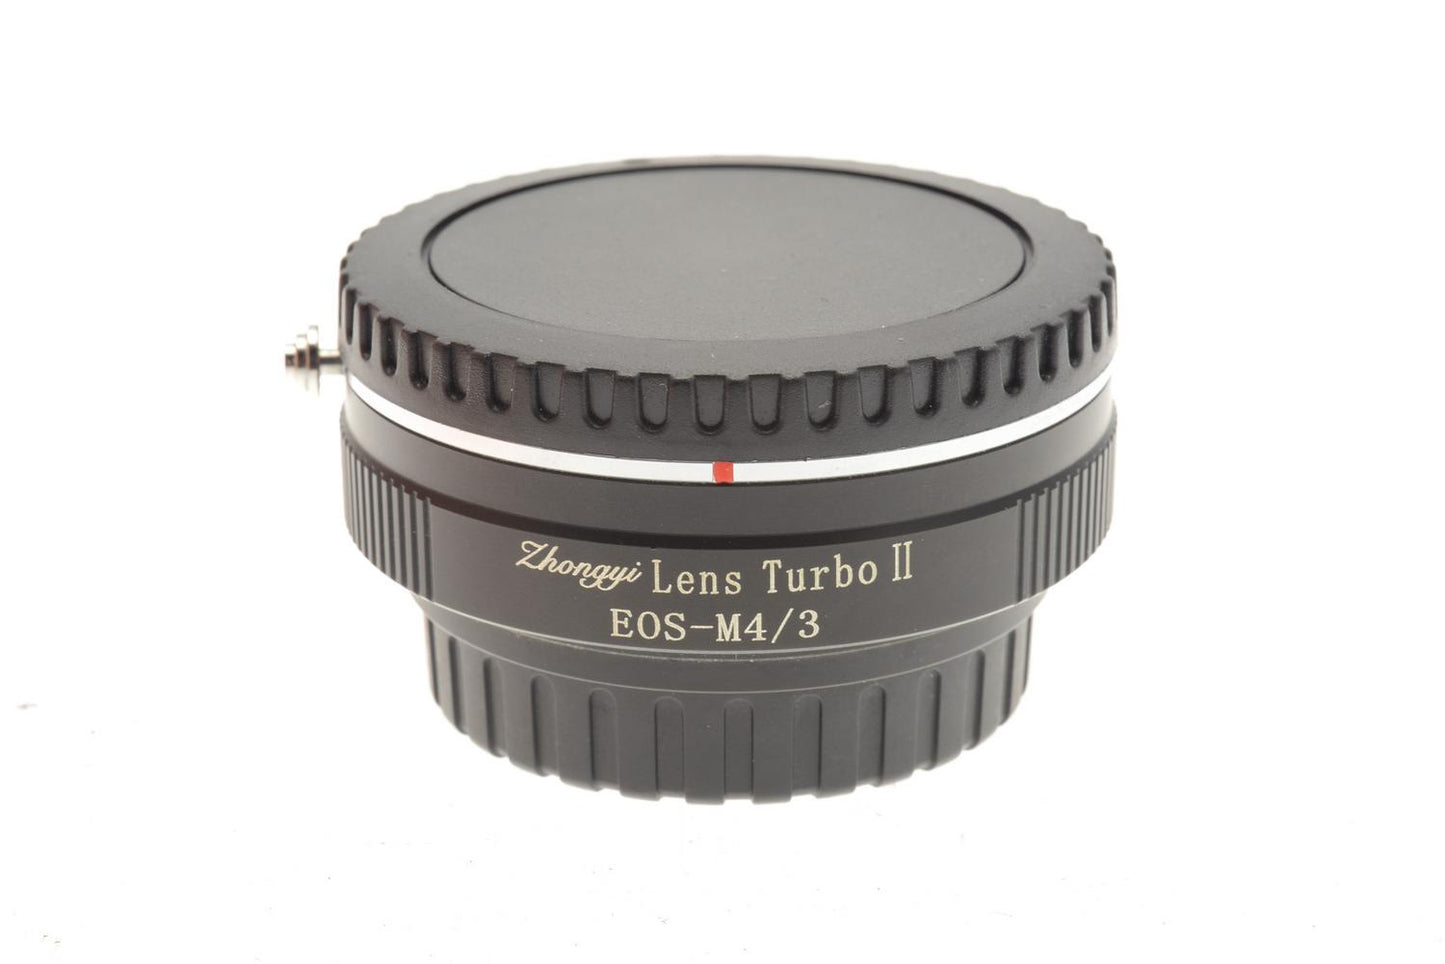 Other Zhongyi Lens Turbo II Canon EF - Micro 4/3 (EOS - M4/3) Adapter - Lens Adapter